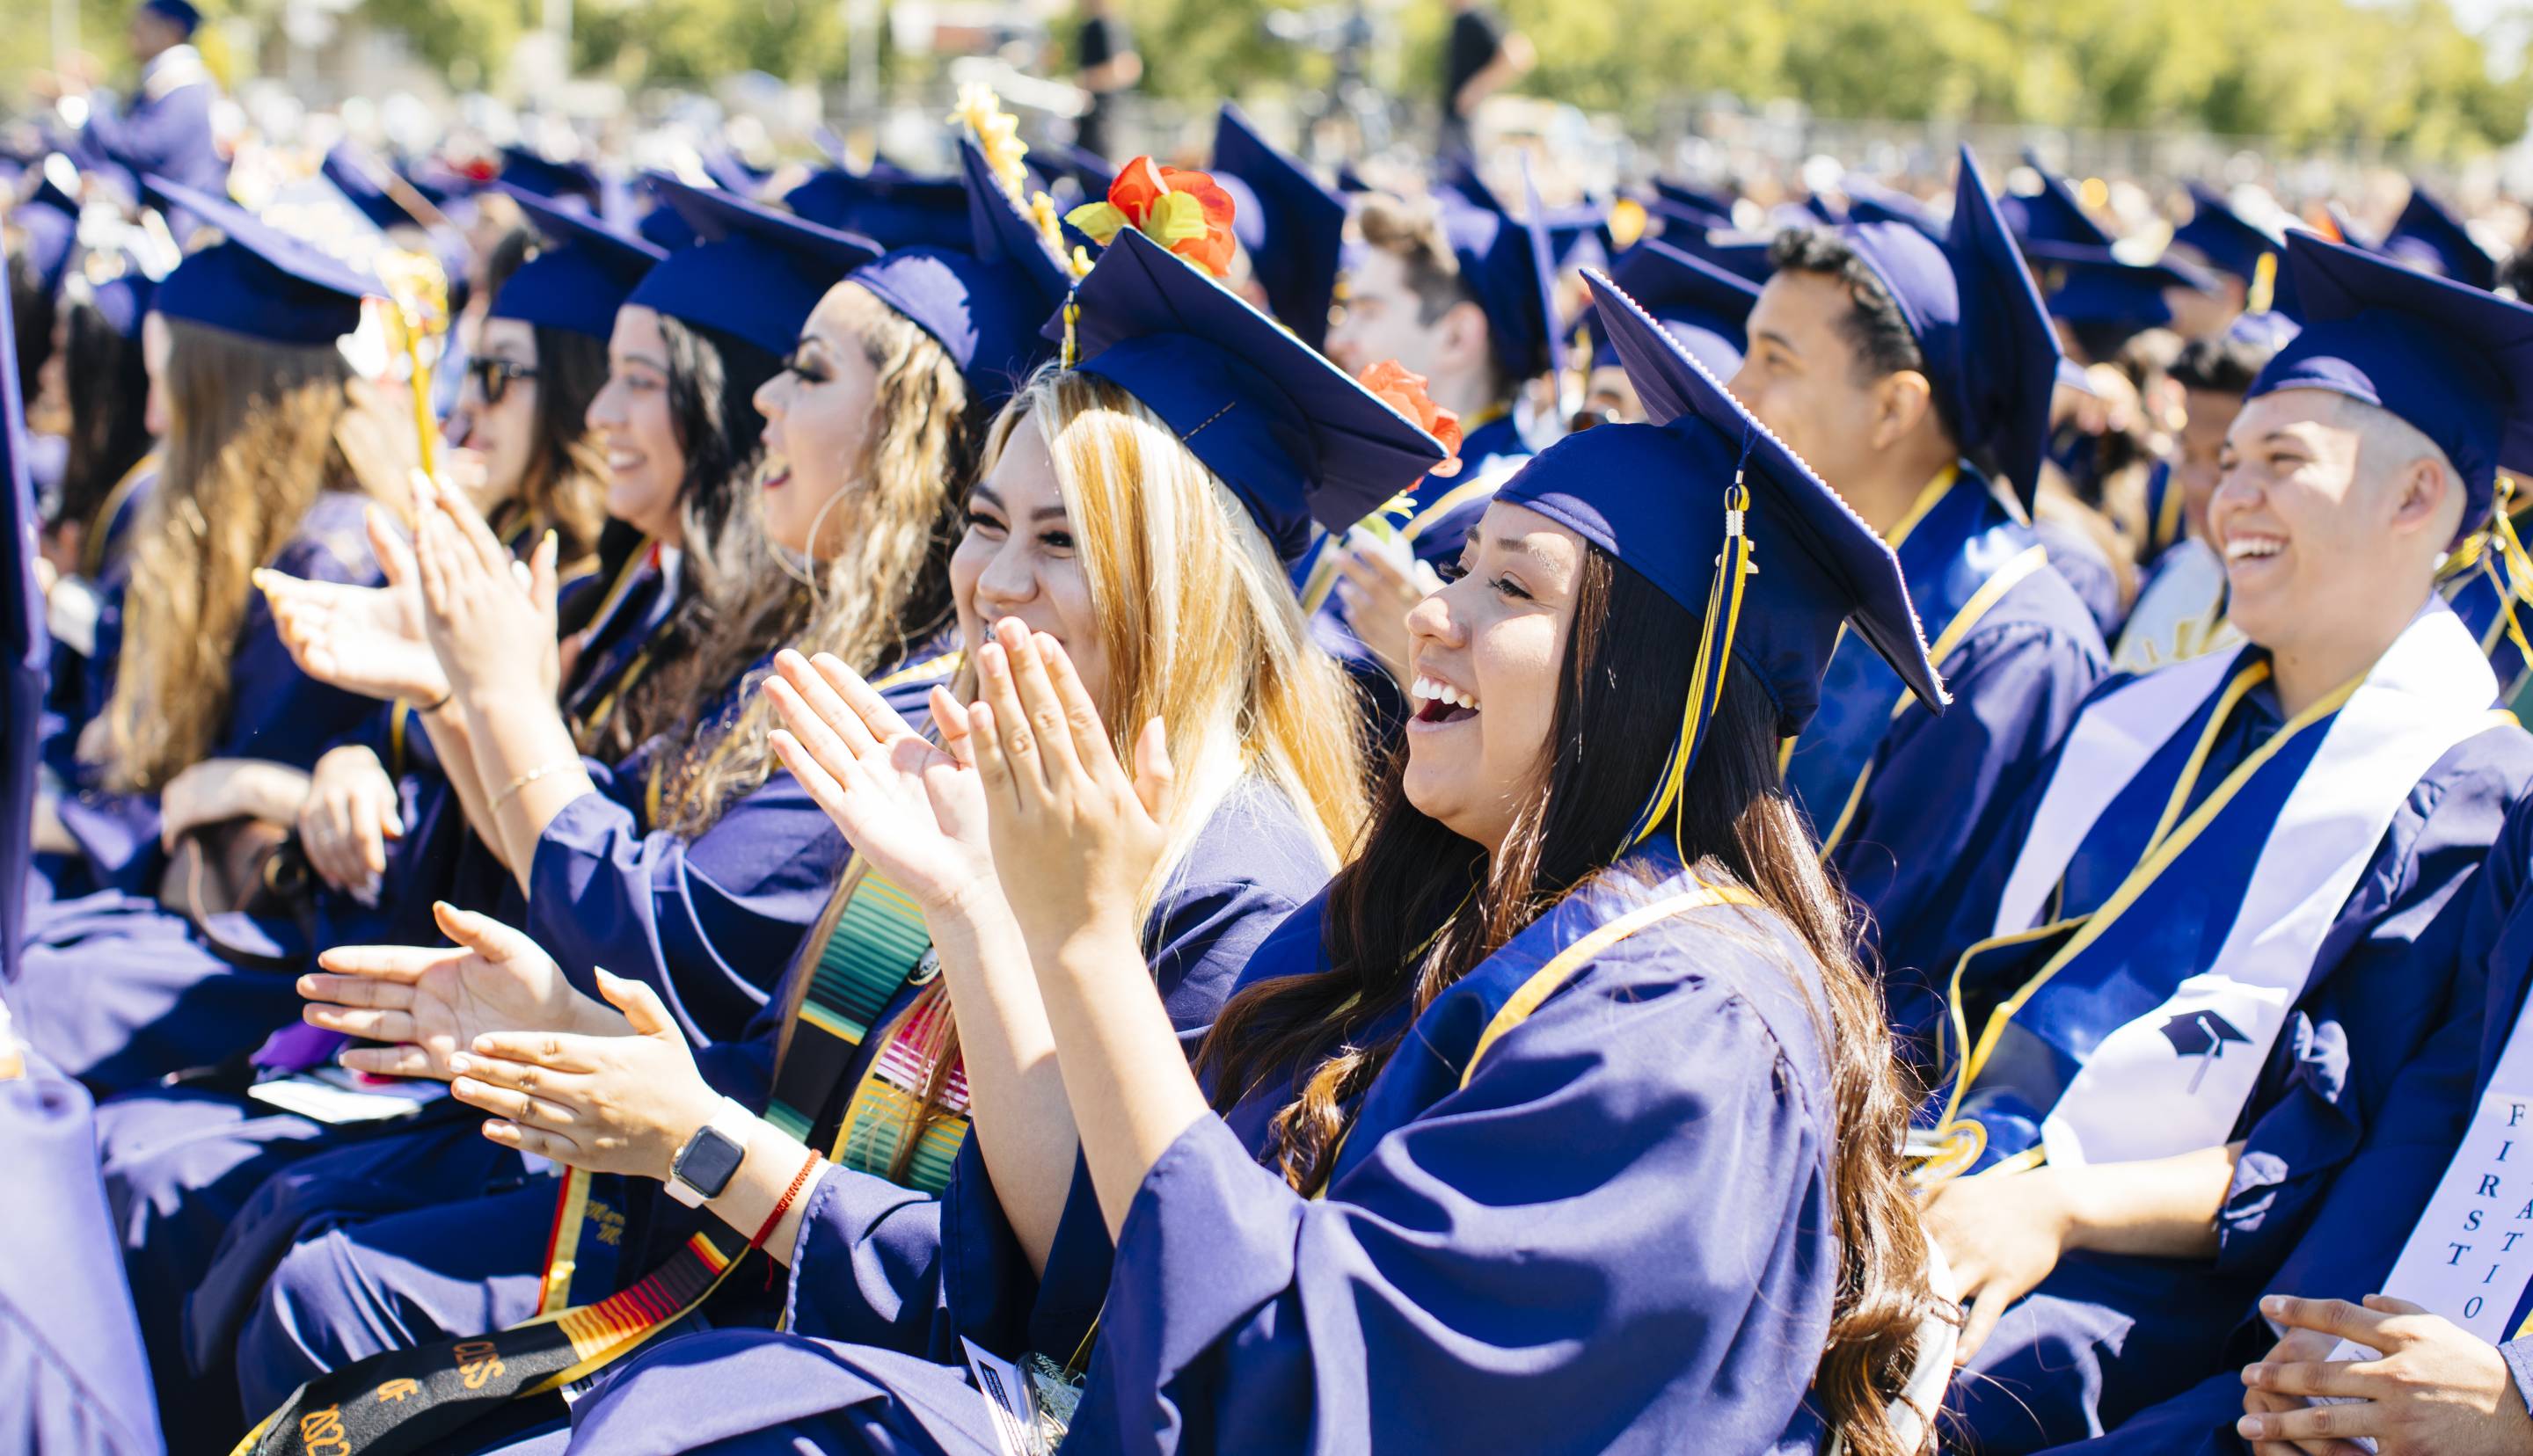 Students clapping at UC Merced graduation ceremony